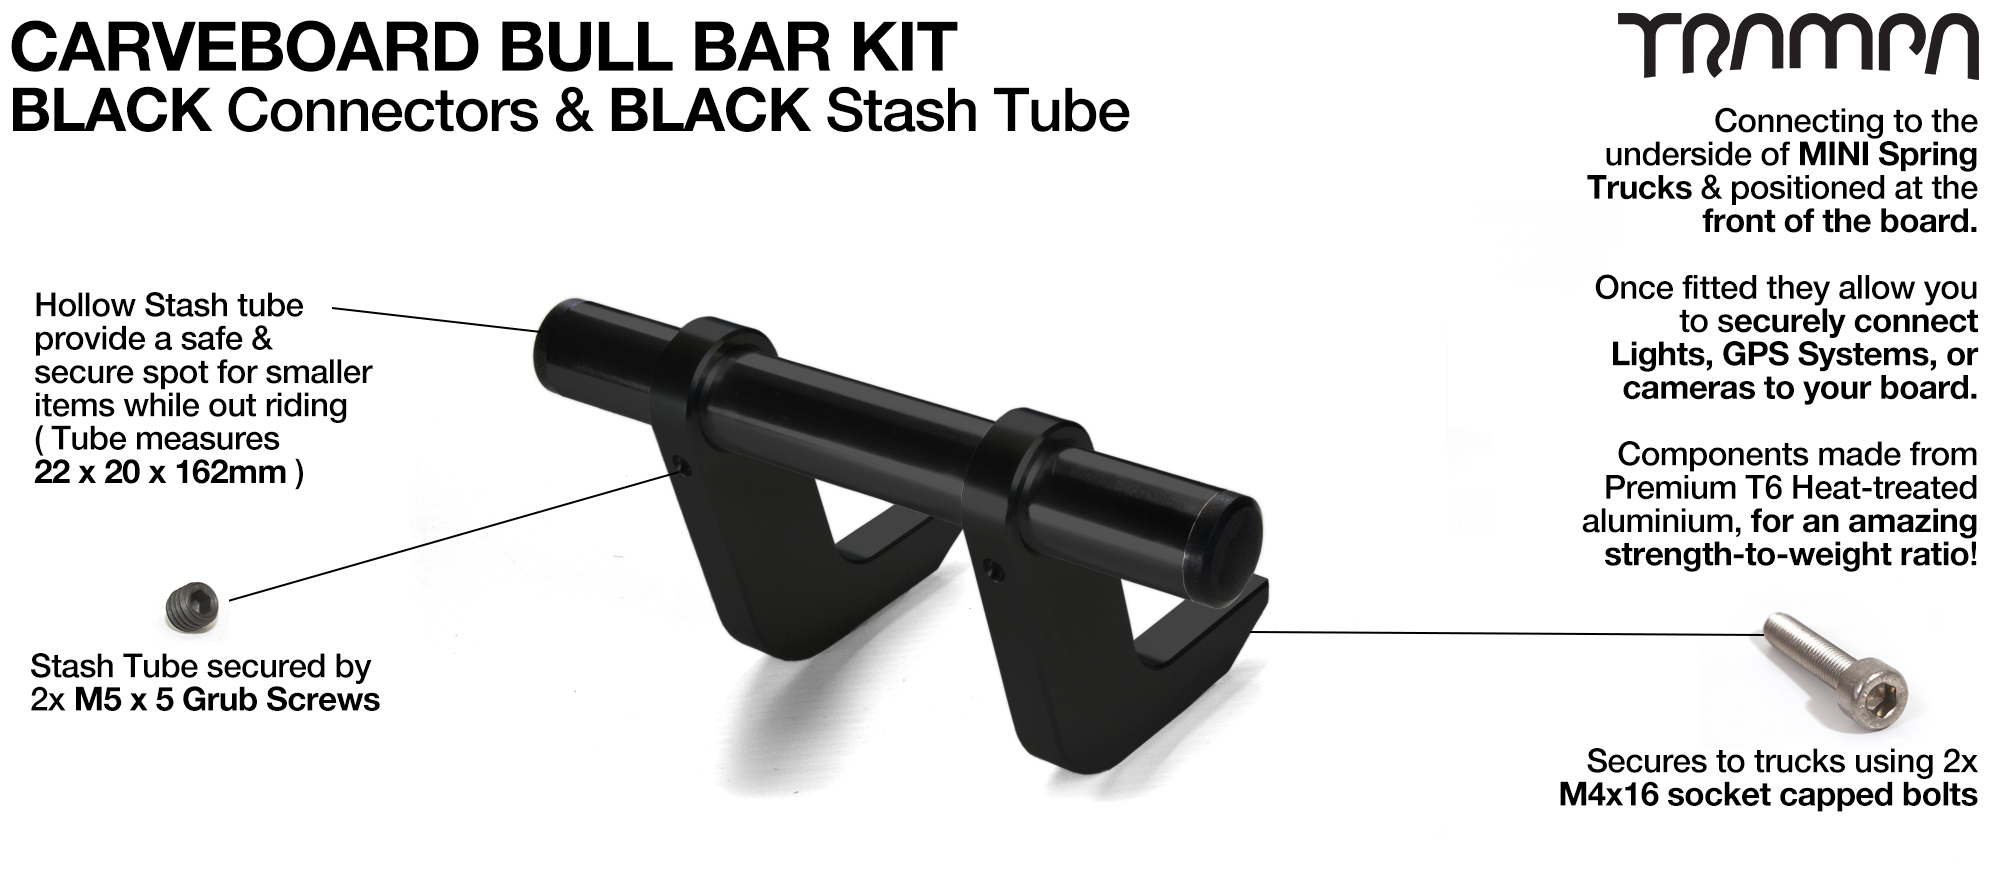 BLACK Uprights & BLACK Crossbar BULL BARS for CARVE BOARDS T6 Heat Treated CNC'd Aluminium Uprights, with Hollow Aluminium Stash Tubes with Rubber end bungs